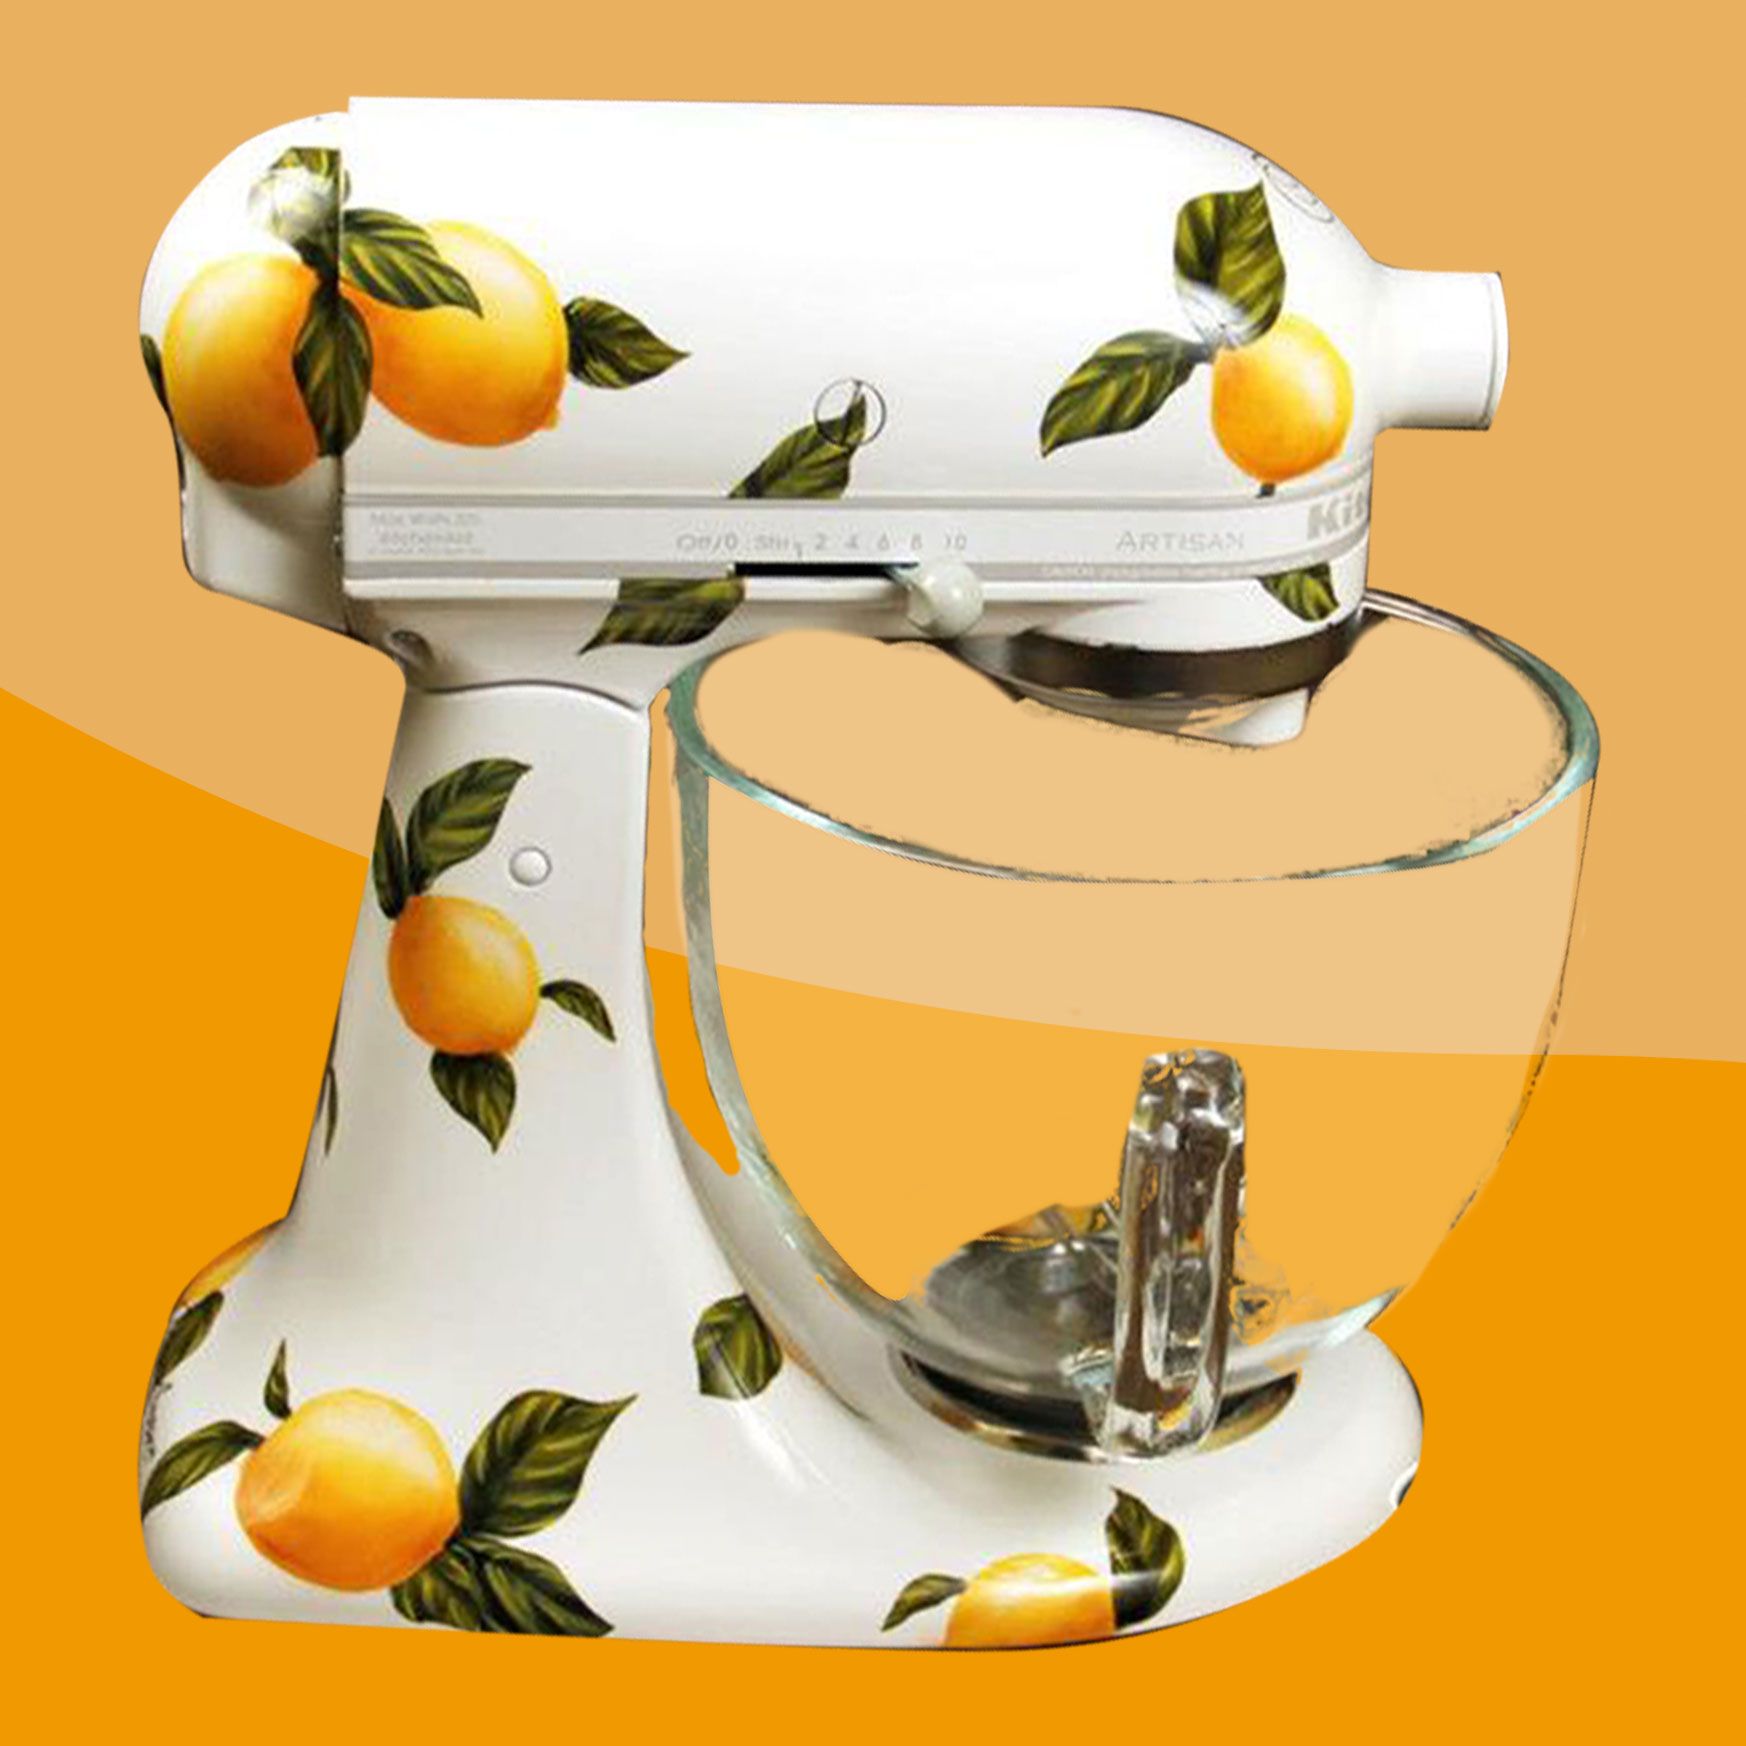 How to Paint Your Kitchen Aid Mixer